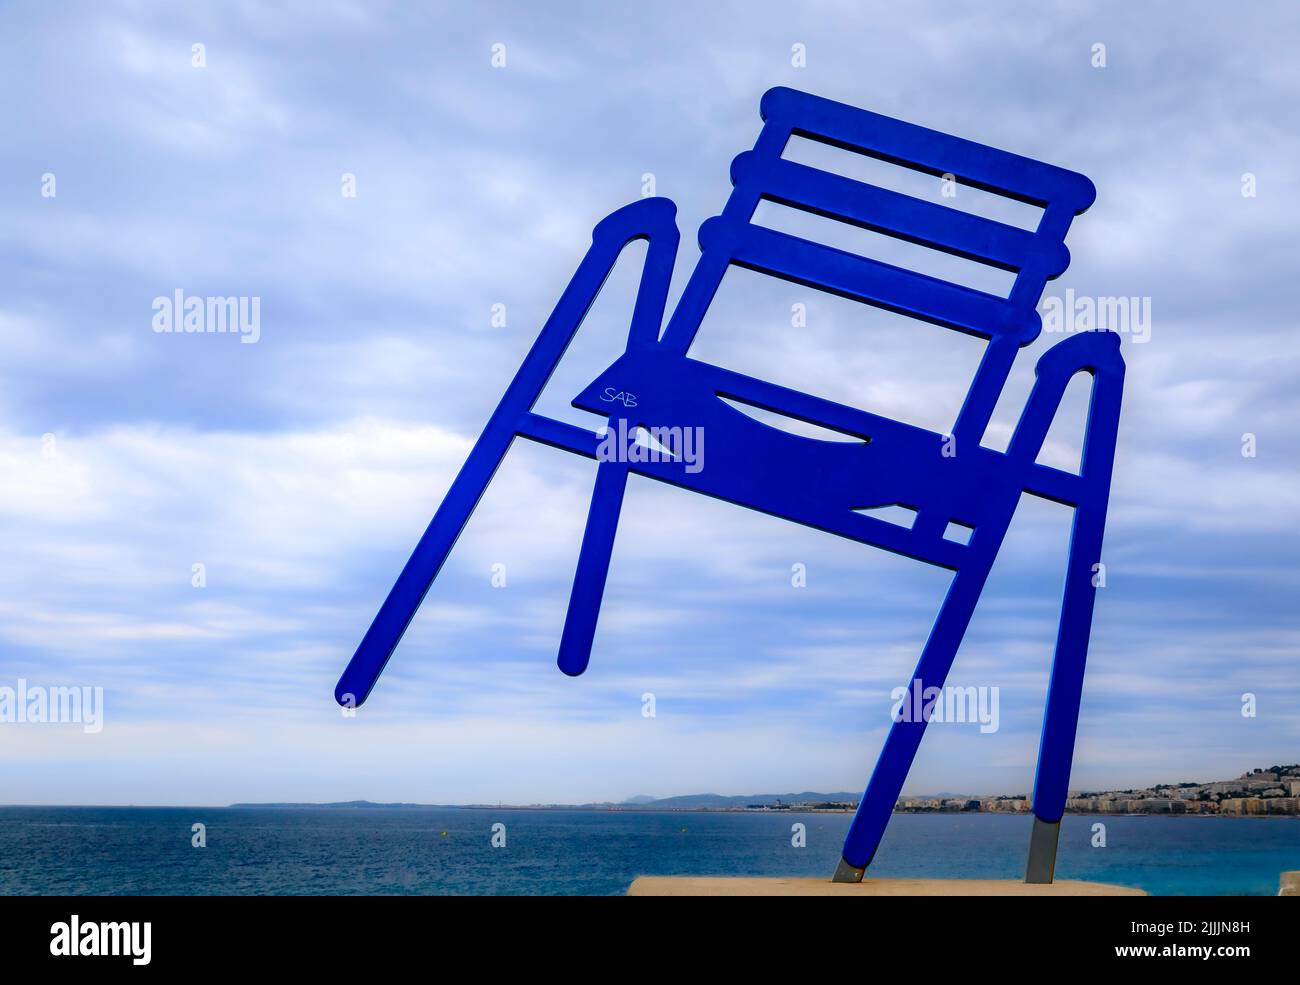 Nice, France - May 25, 2022: Mediterranean Sea and La Chaise Bleue or Blue  Chair sculpture by Sabine Geraudie, symbol of Nice on Promenade des Anglais  Stock Photo - Alamy